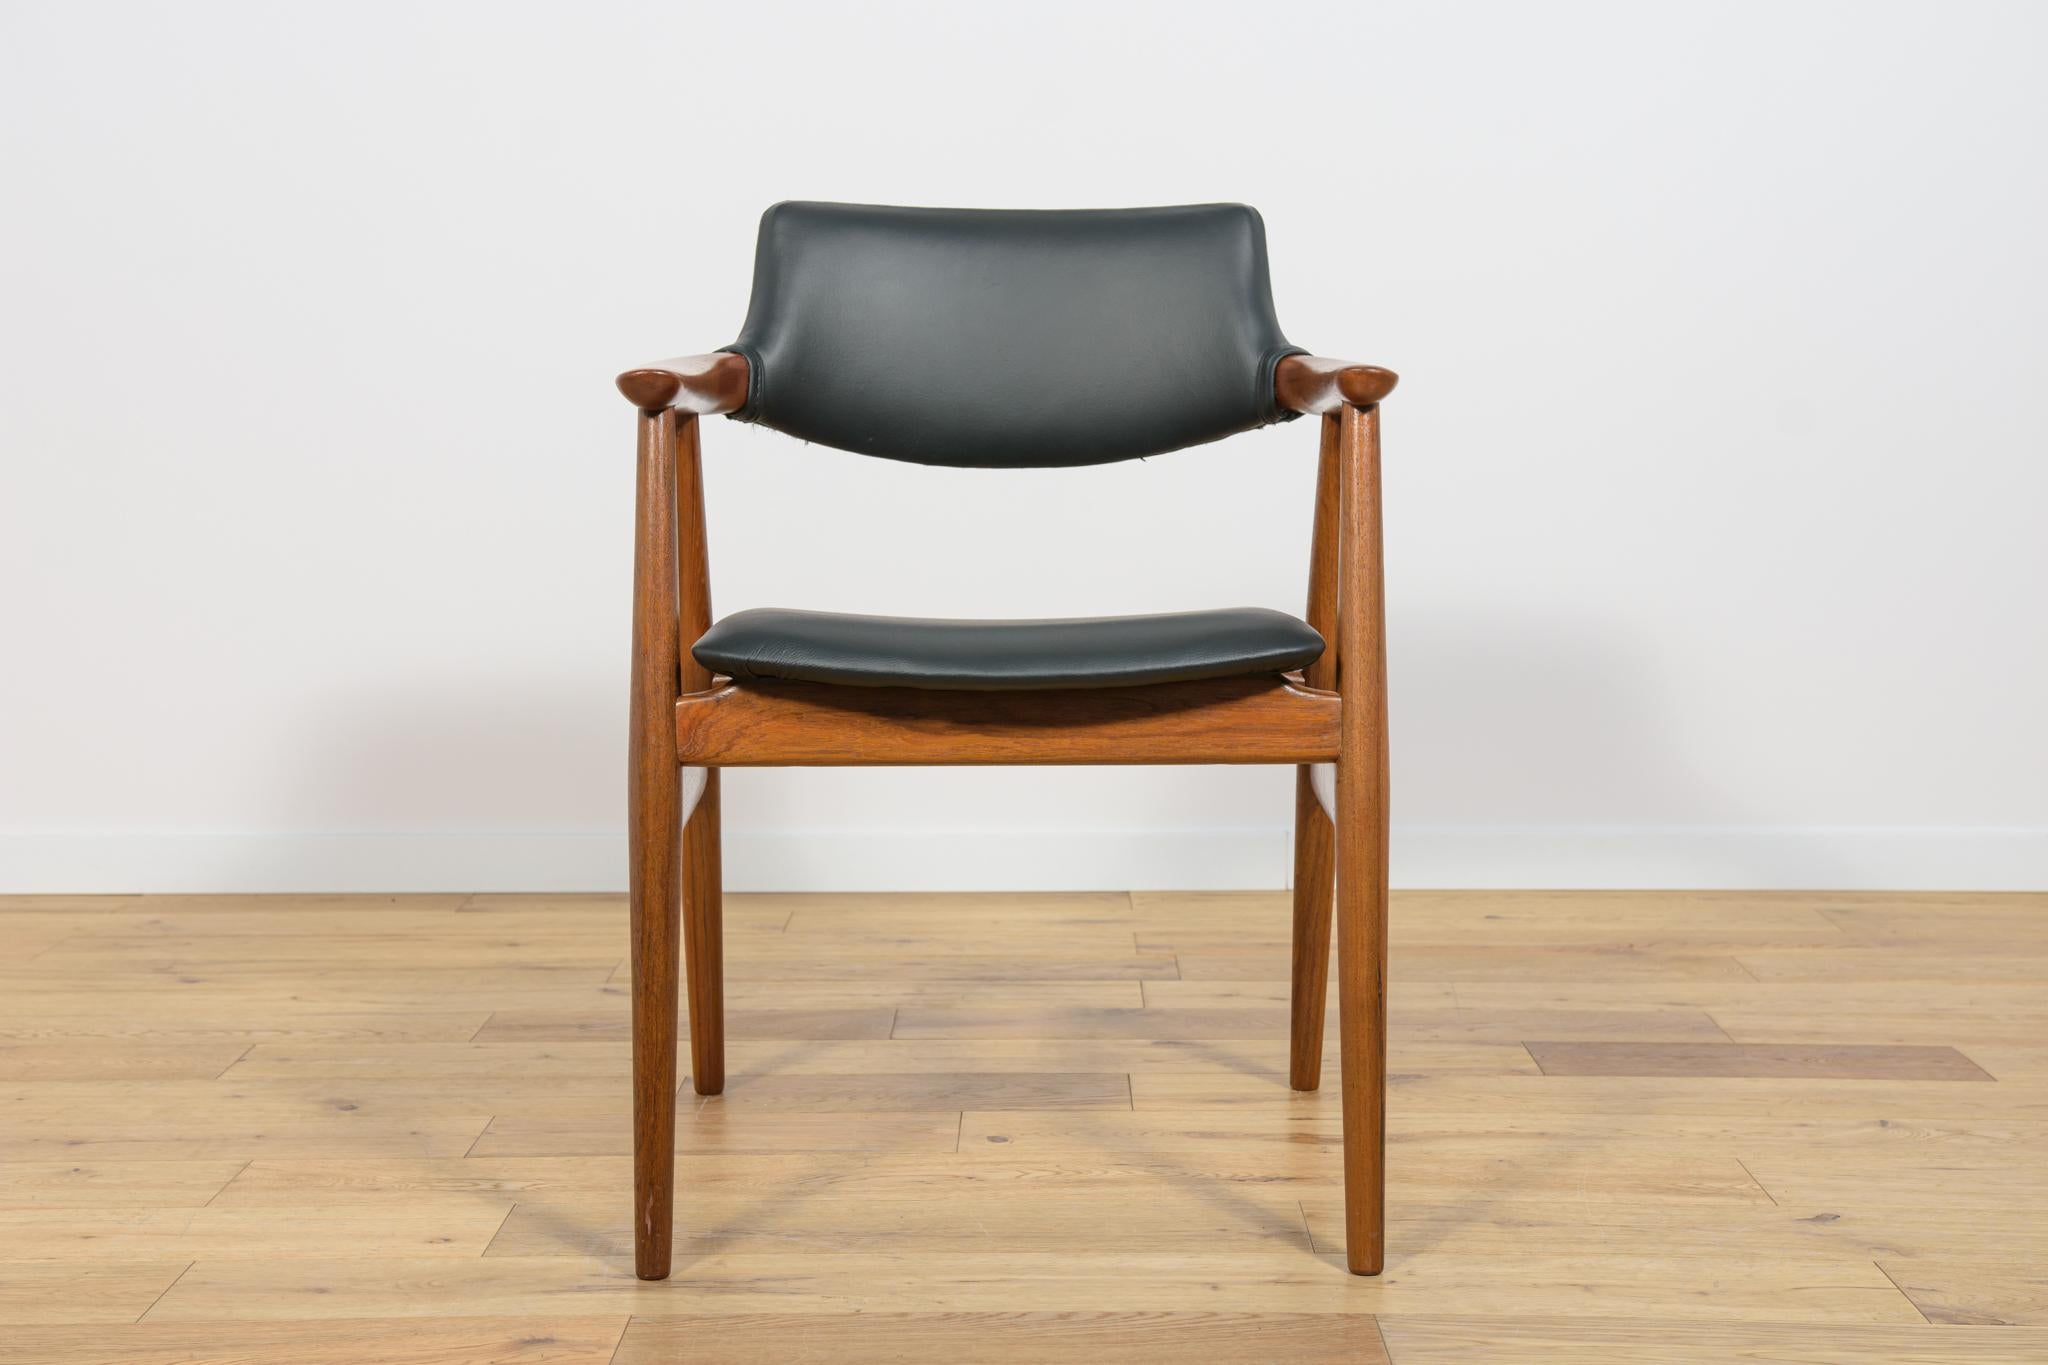 Mid-20th Century Mid century Teak Dining Chairs Model GM11 by Svend Åge Eriksen for Glostrup. For Sale